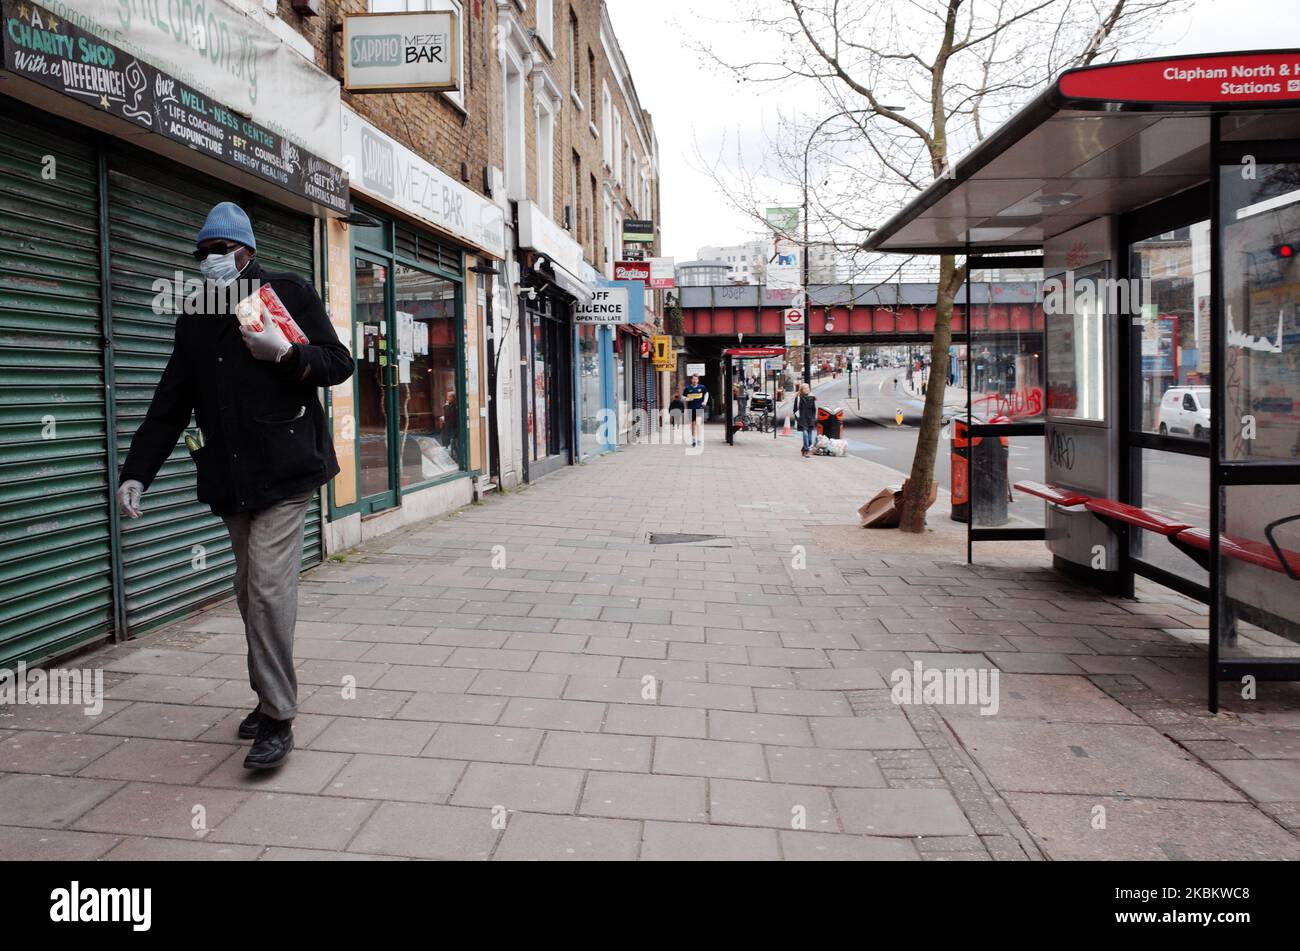 A man wearing a mask carries shopping along Clapham High Street in the borough of Lambeth in London, England, on April 1, 2020. Official figures report that Lambeth currently has 418 recorded cases of the covid-19 coronavirus, higher than any other local authority district in London and fourth among local authorities in England as a whole (behind Sheffield, Hampshire and Birmingham). The borough was previously trailing the neighbouring south London district of Southwark, which remains similarly hard-hit, currently with 415 cases. (Photo by David Cliff/NurPhoto) Stock Photo